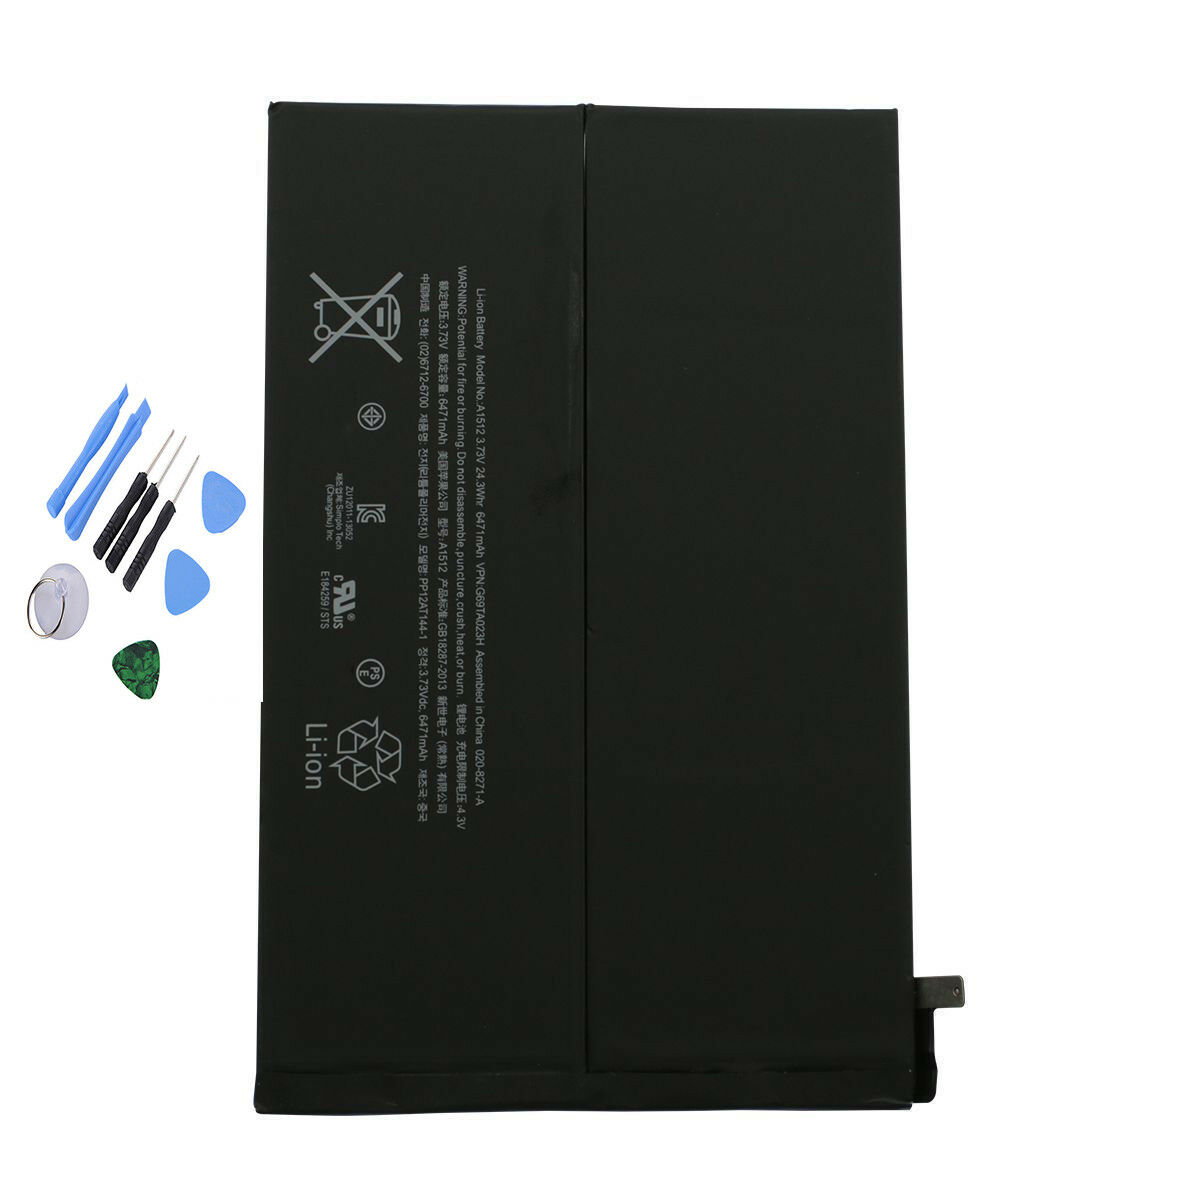 OEM SPEC 6471mAh Replacement Battery For iPad Mini 2 3 2nd 3rd Gen A1489 A1490